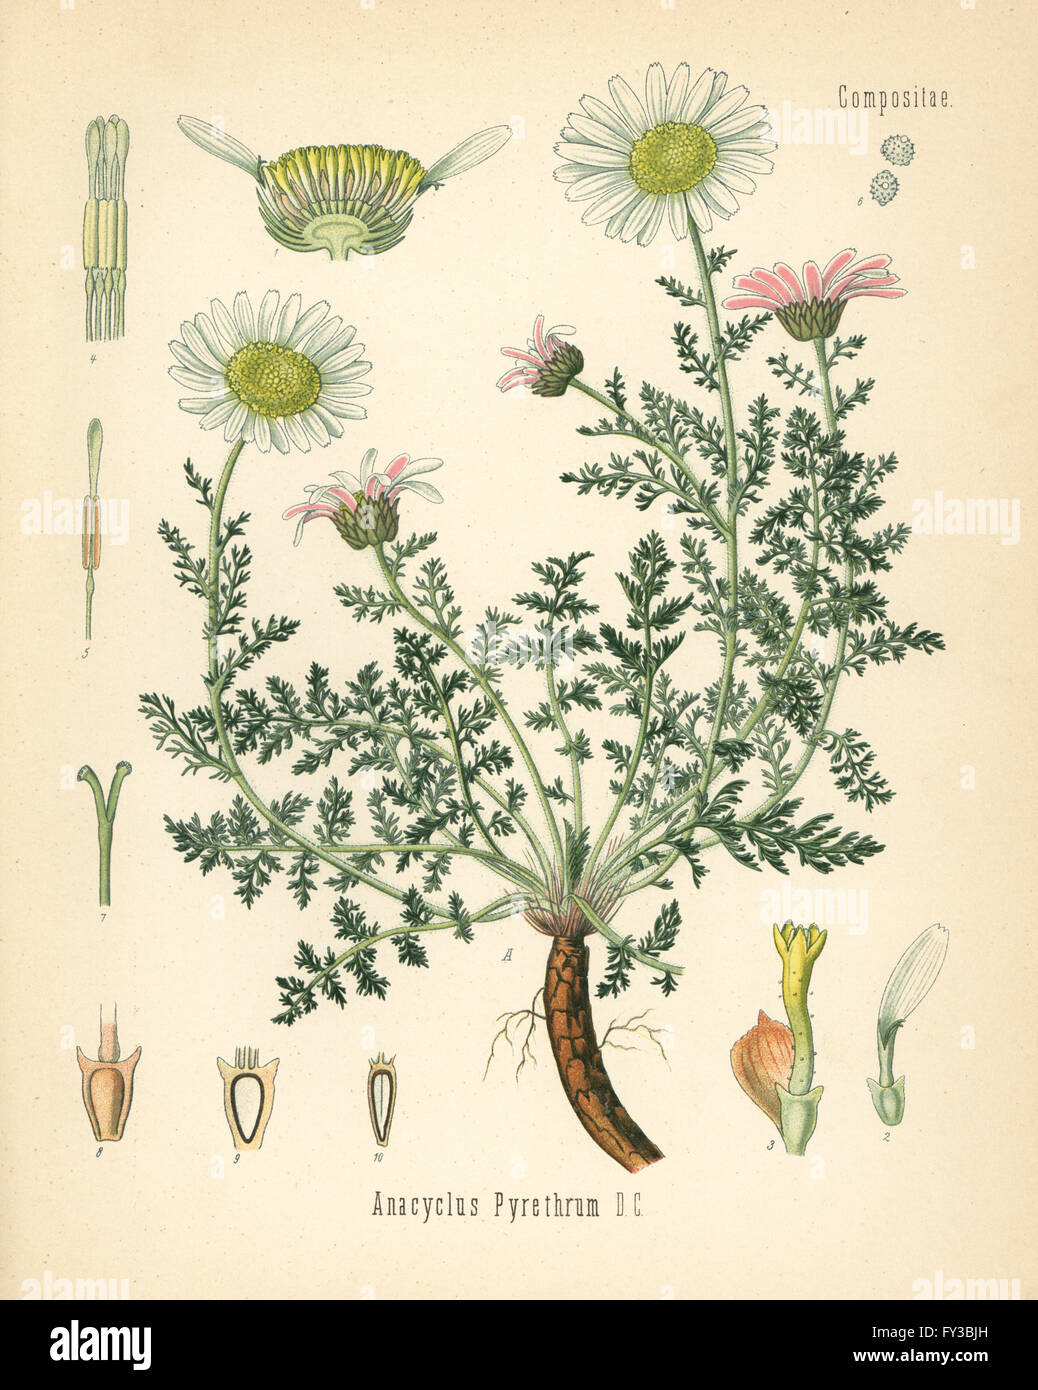 Spanish chamomile or Mount Atlas daisy, Anacyclus pyrethrum. Chromolithograph after a botanical illustration from Hermann Adolph Koehler's Medicinal Plants, edited by Gustav Pabst, Koehler, Germany, 1887. Stock Photo